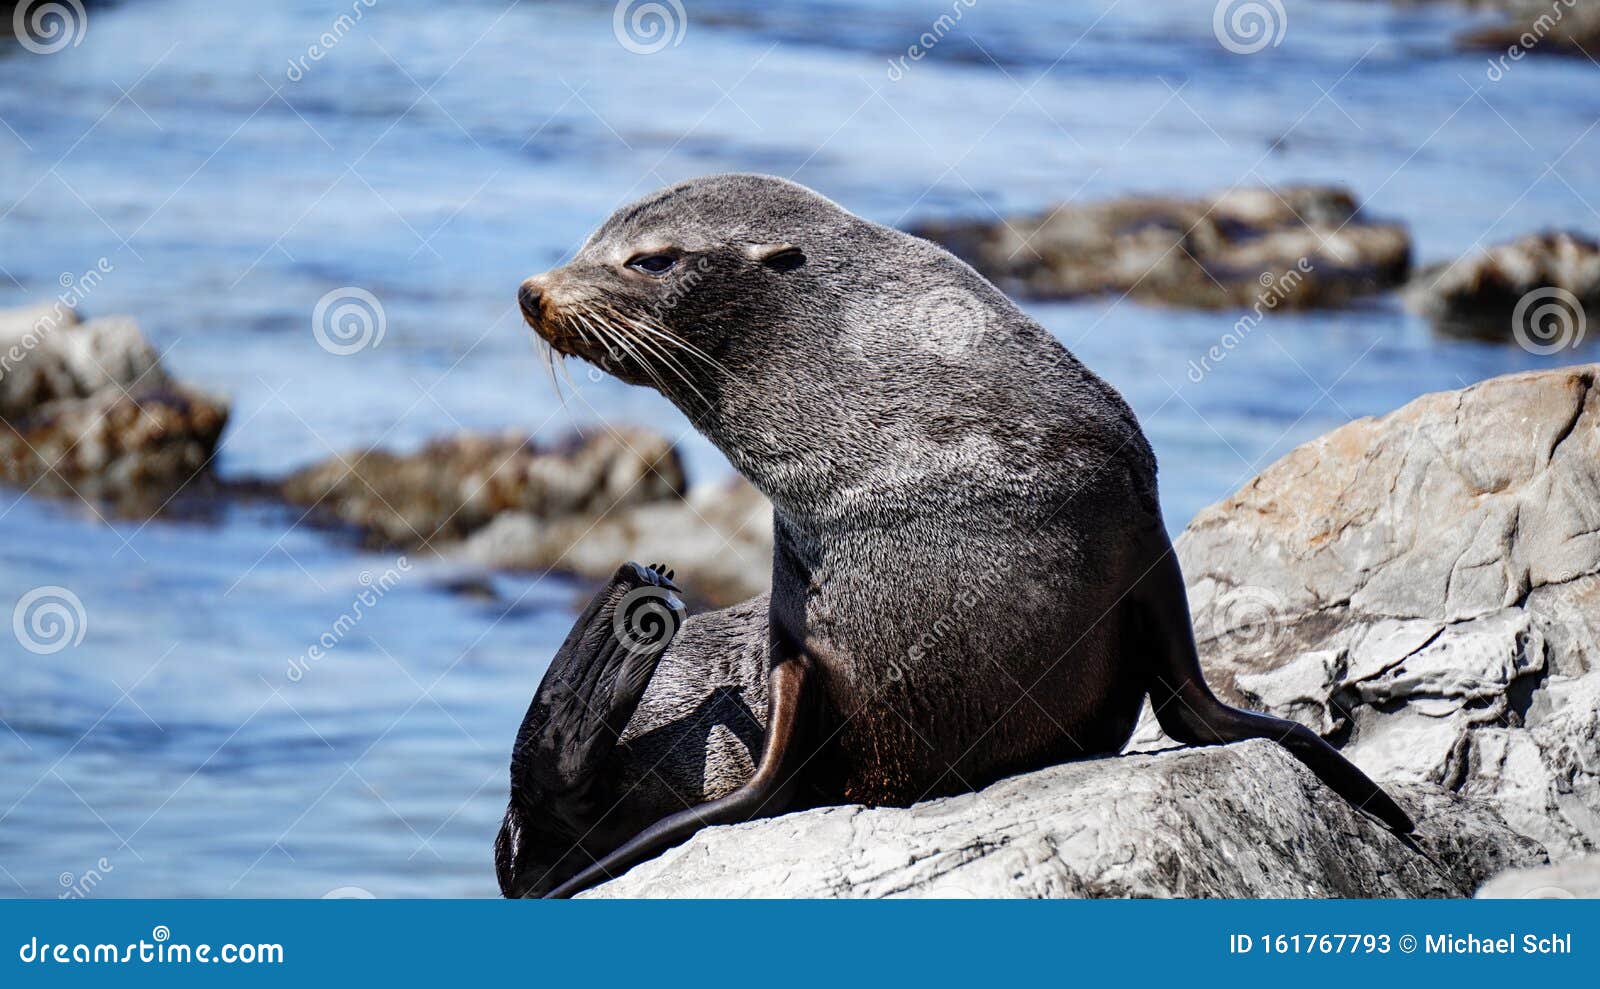 new zealand fur seal of the point kean colony in kaikoura